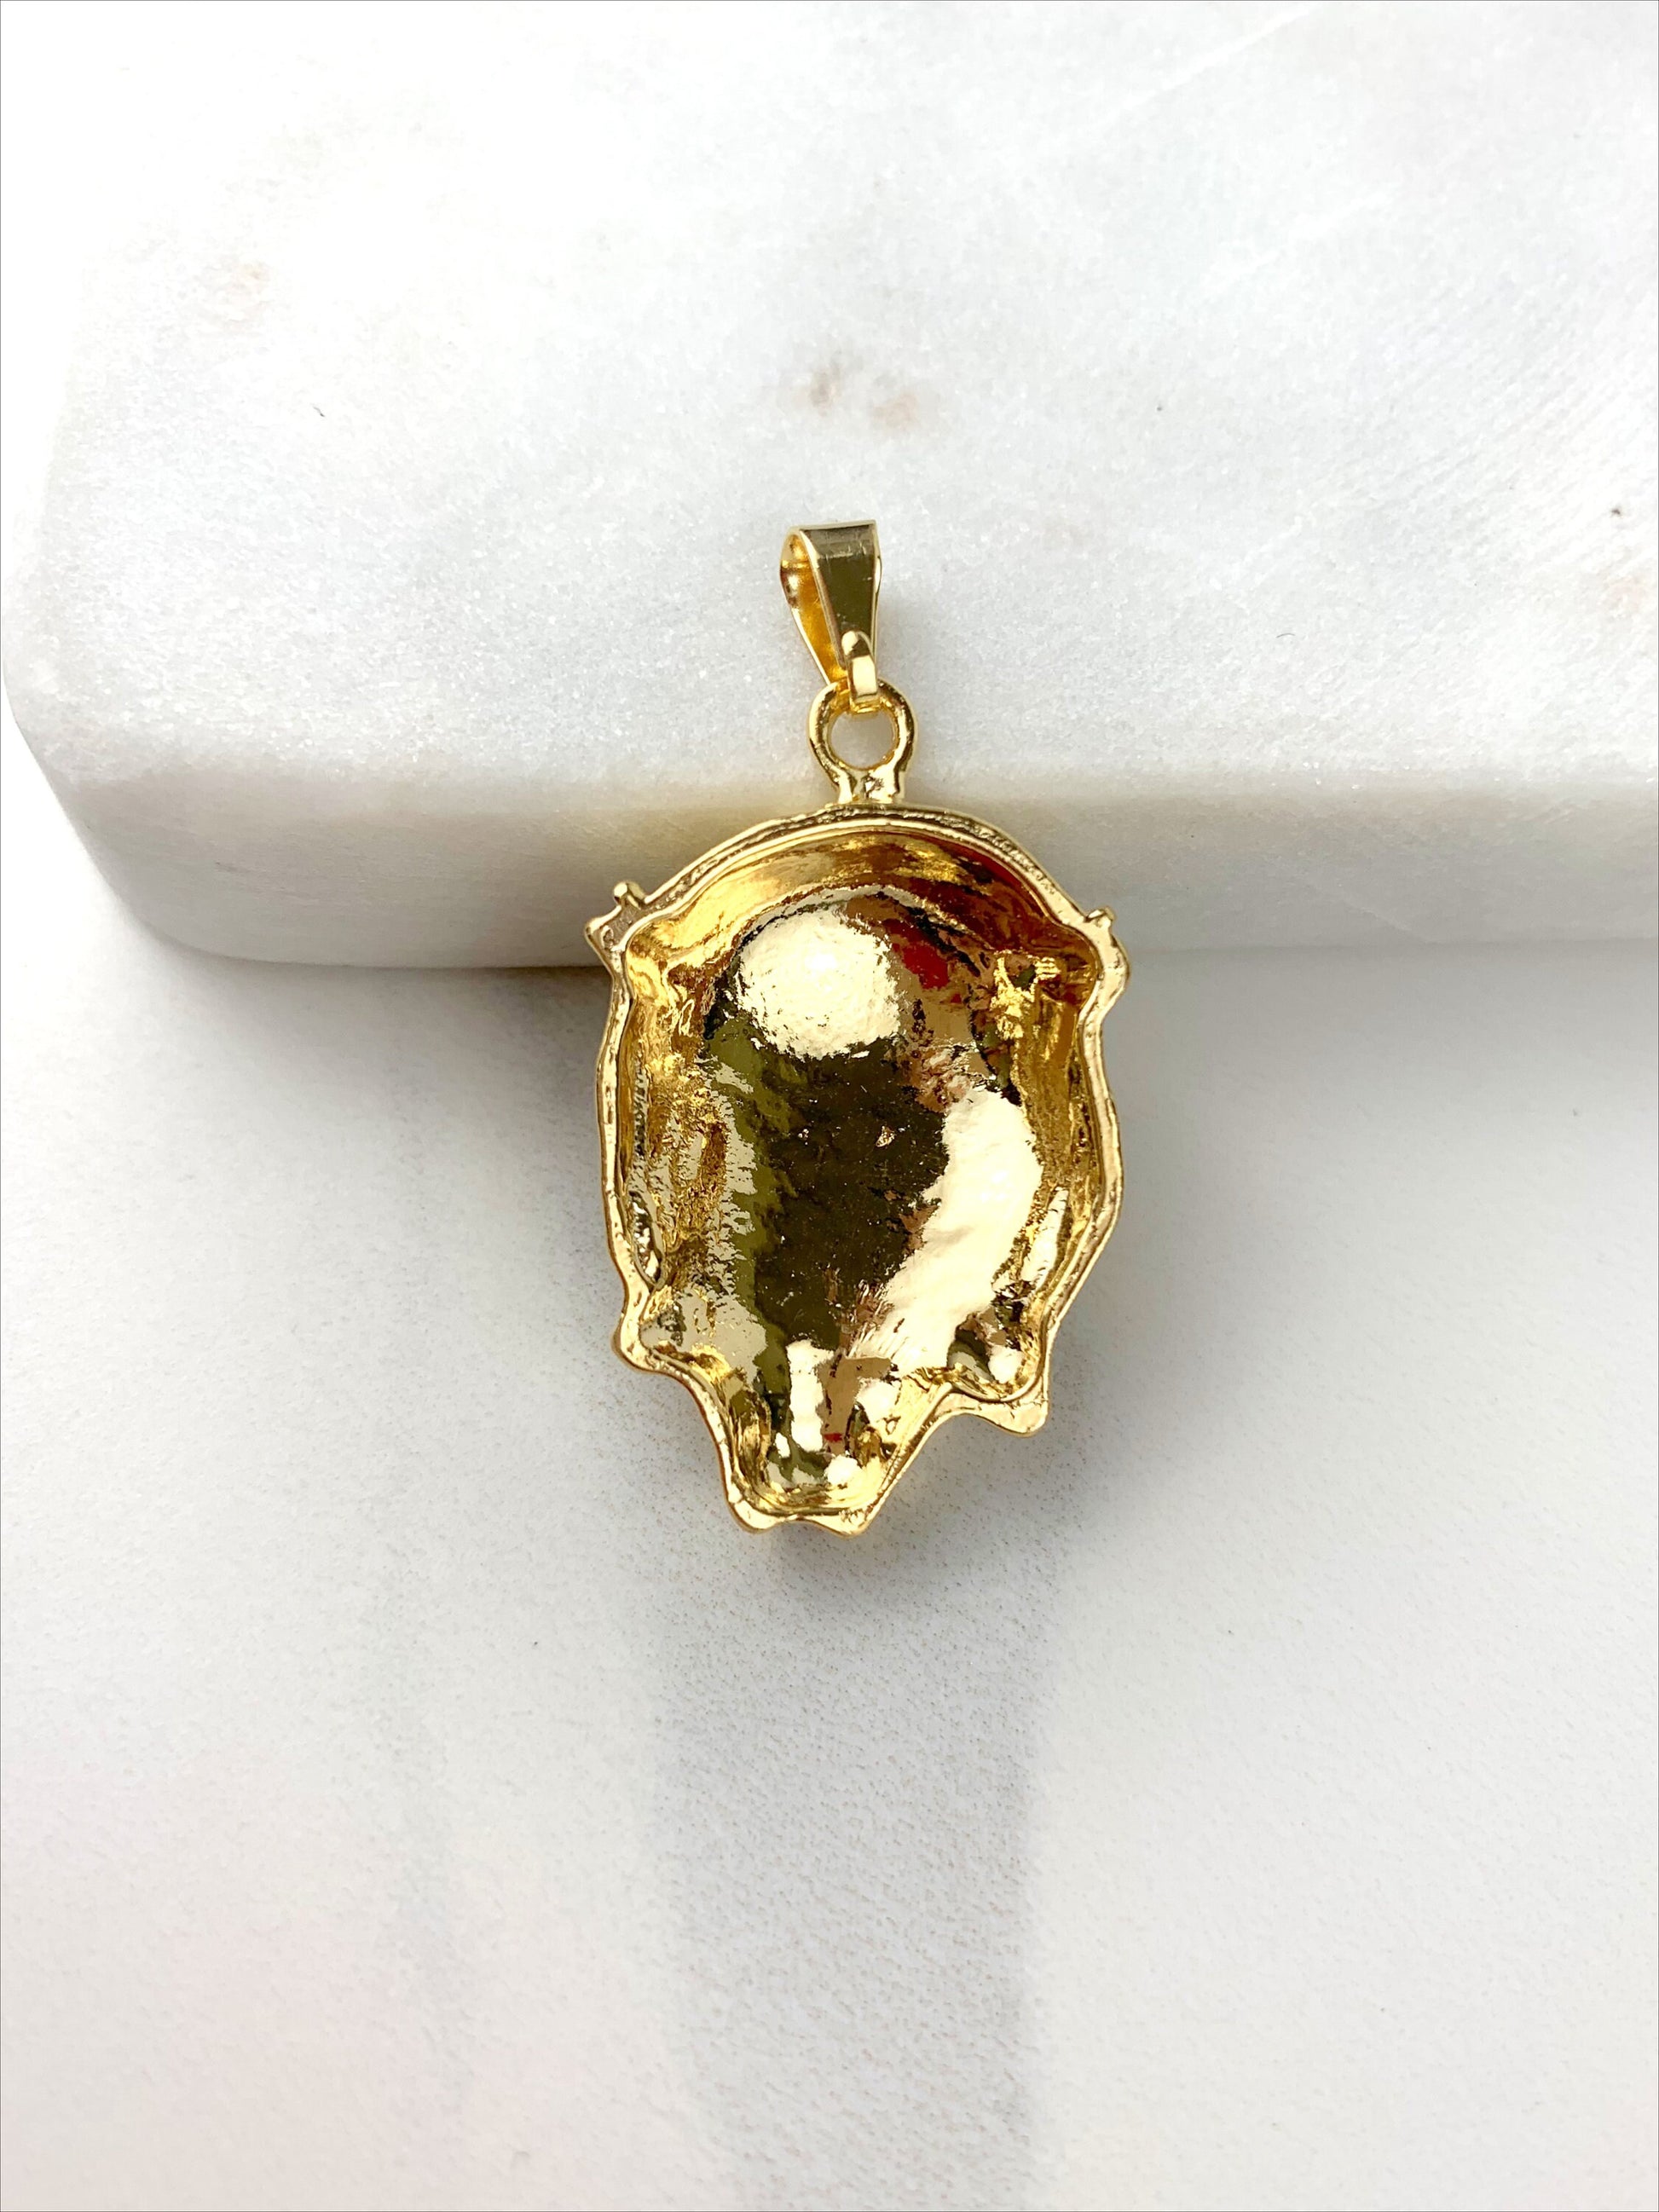 18k Gold Filled 3D Puffed Jesus Christ Face Pendants Charm, Religious Jewelry, Wholesale Jewelry Making Supplies